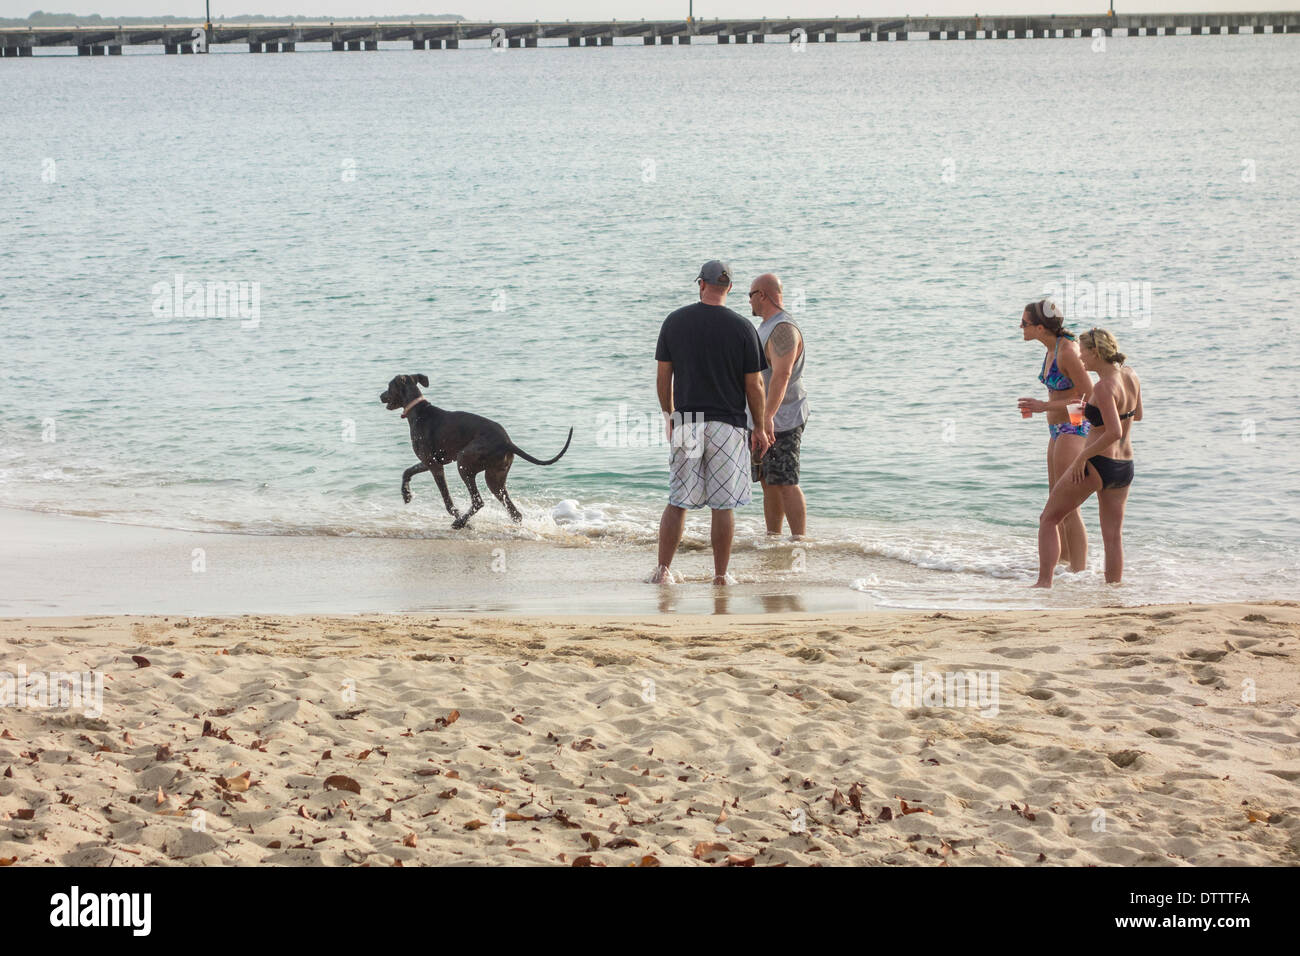 Two Caucasian men and women in their 30s play in the surf with a dog on the beach of St. Croix, U.S. Virgin Islands. Stock Photo